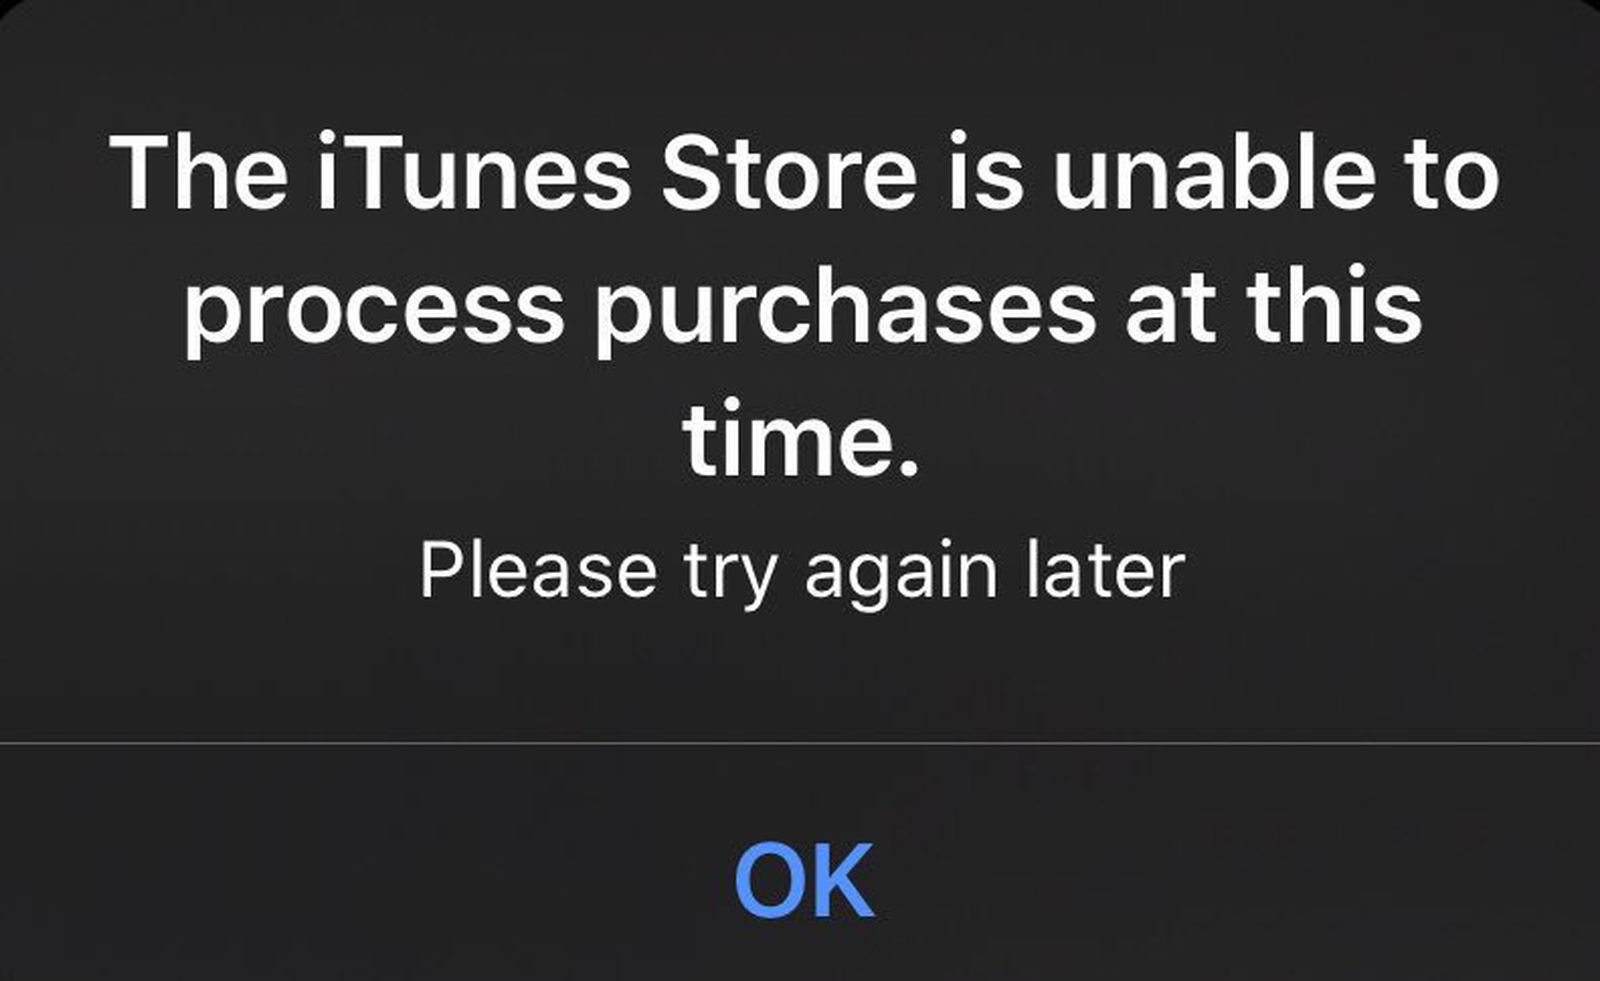 The itunes store is unable to process purchases at this time